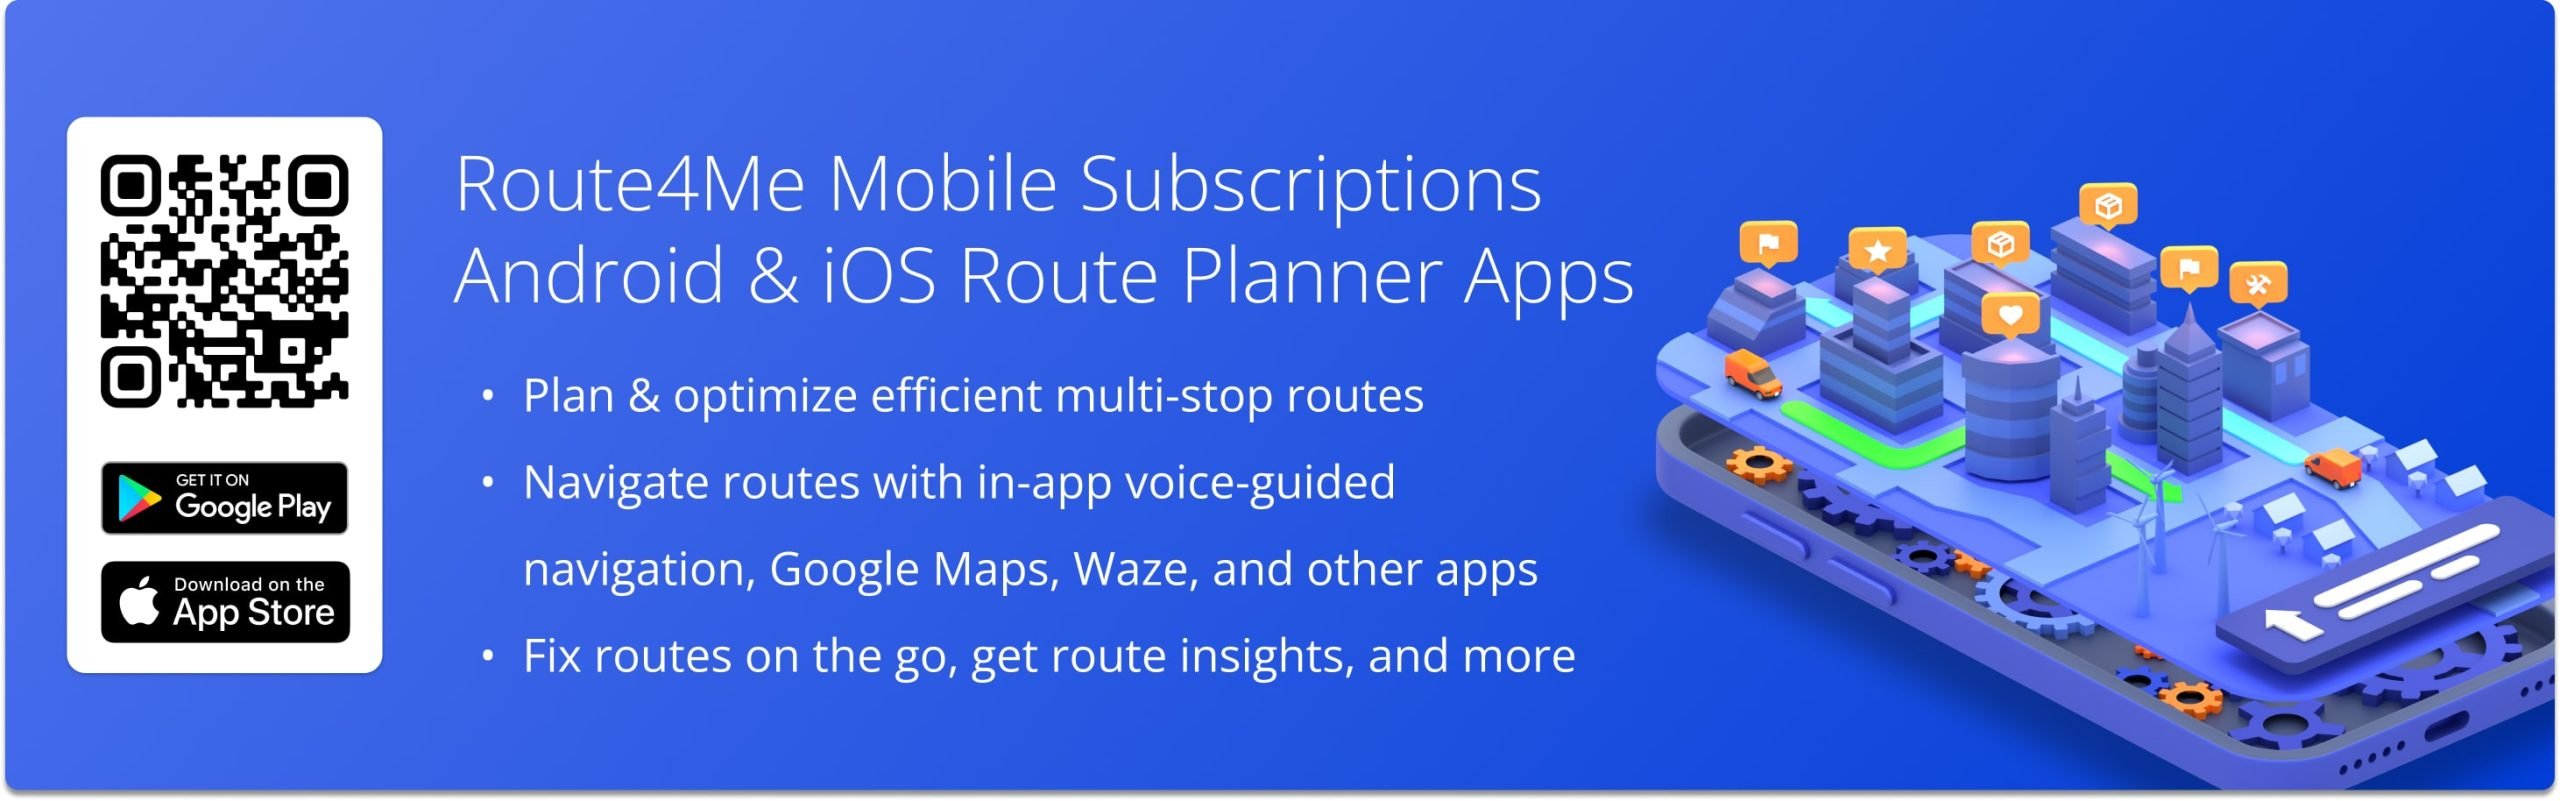 Route4Me's Marketplace Subscriptions support the Route4Me Web Platform access and Mobile Driver Apps connectivity. Route4Me's Mobile Subscriptions support only the Mobile App access and don't support the Route4Me Web Platform access.